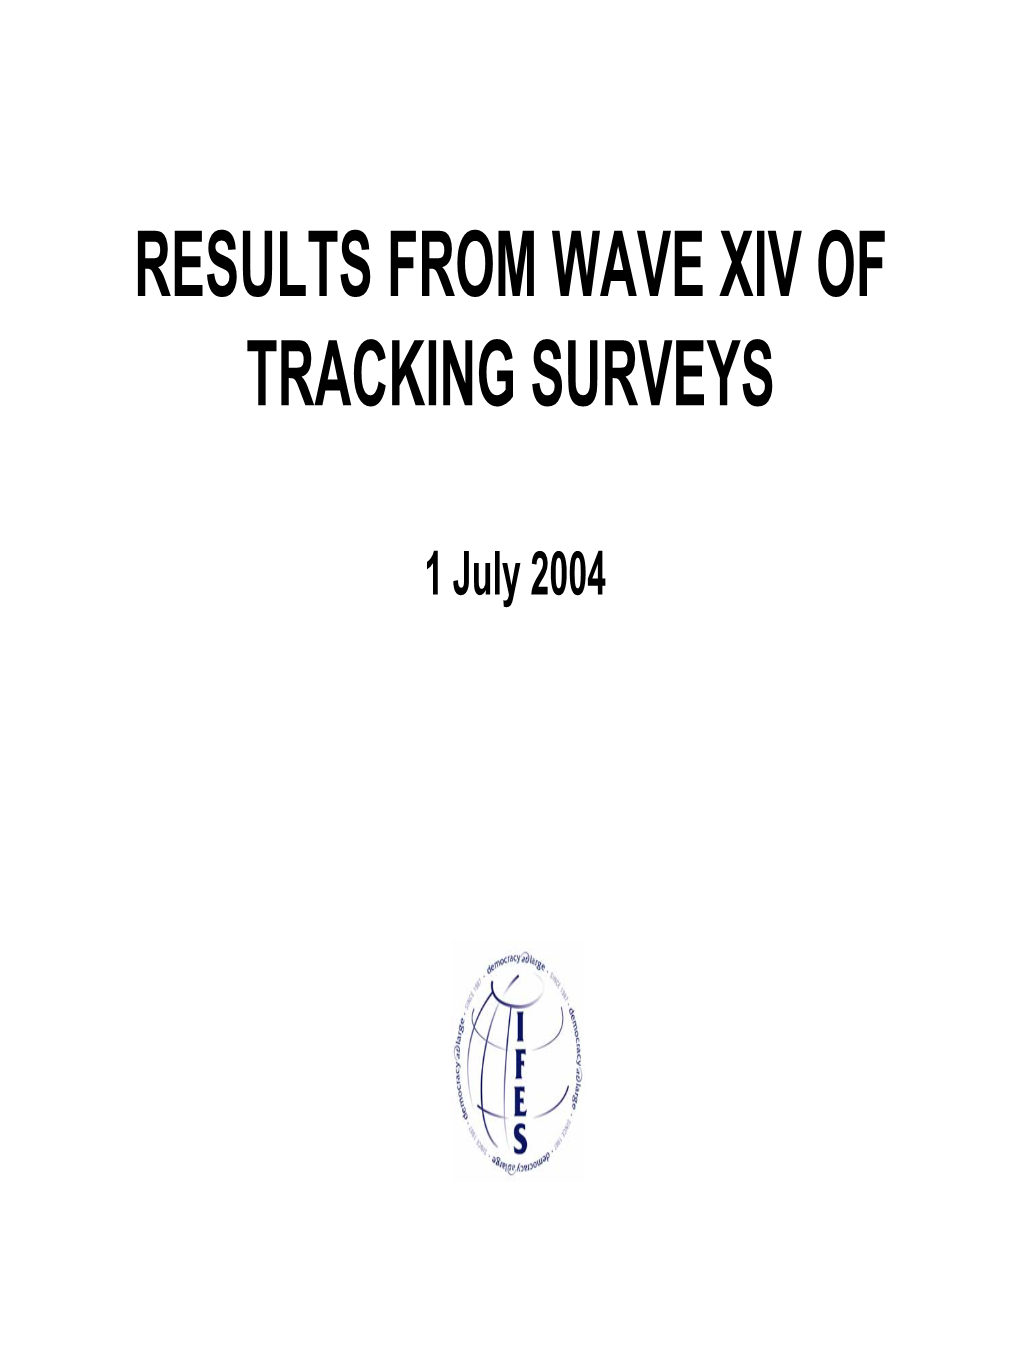 Results from Wave Xiv of Tracking Surveys